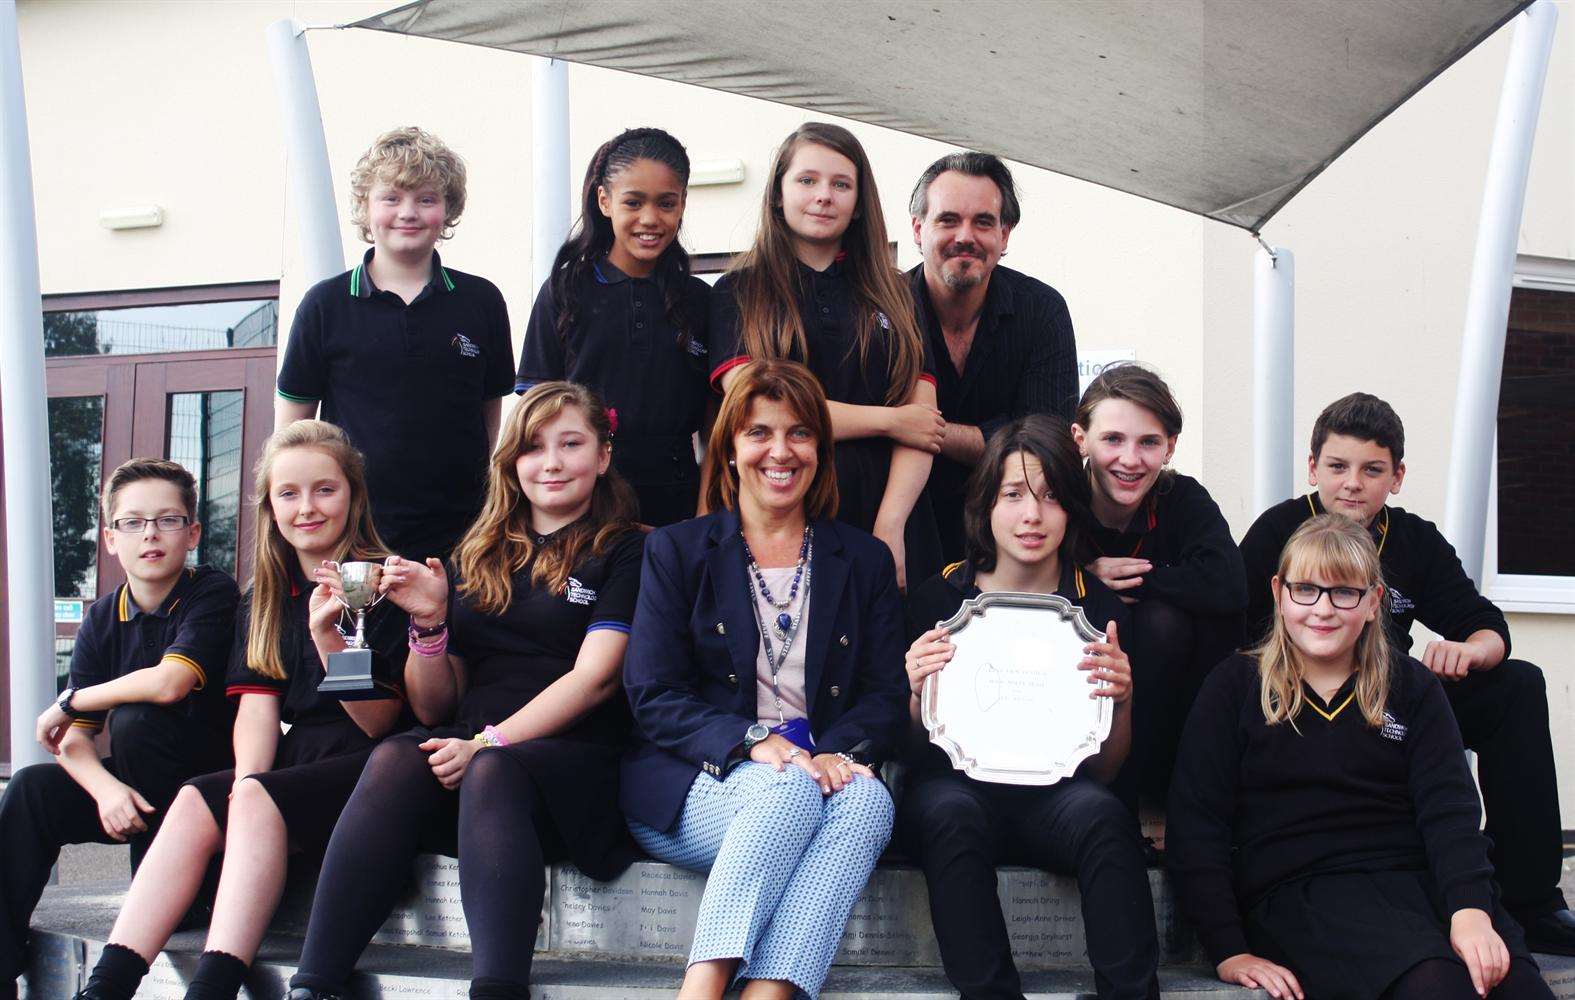 pupils-at-sandwich-technology-school-celebrate-after-winning-two-awards-at-kent-film-festival-in